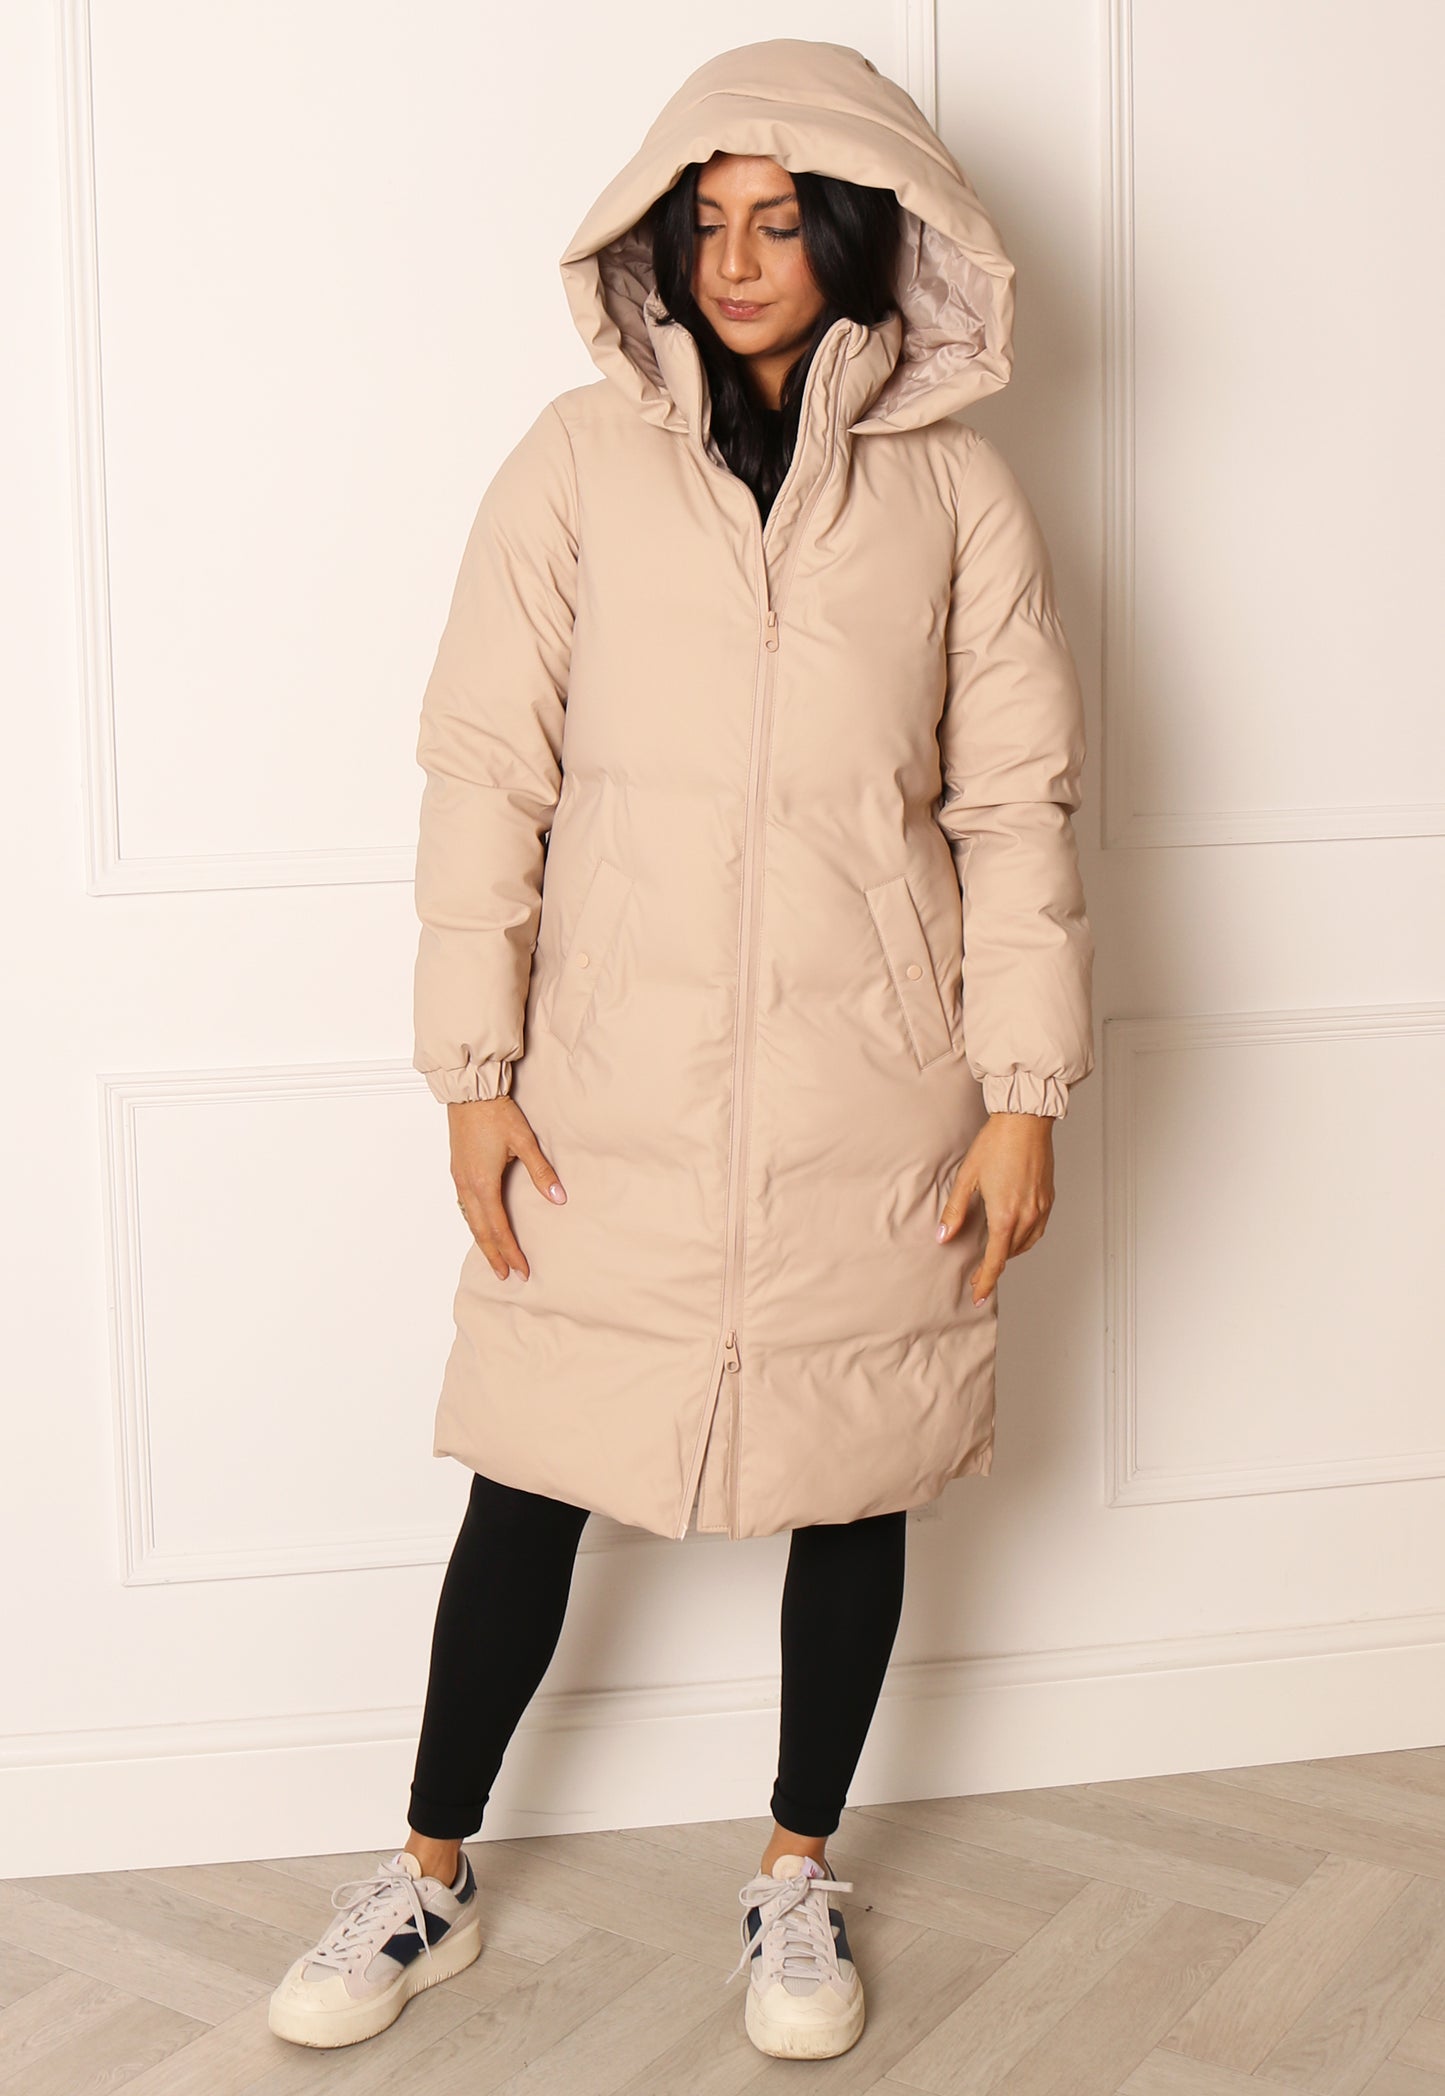 VERO MODA Long Noe Water Repellent Quilted Hooded Midi Puffer Coat in Soft Beige | One Clothing VERO Long Noe Water Repellent Quilted Hooded Puffer in